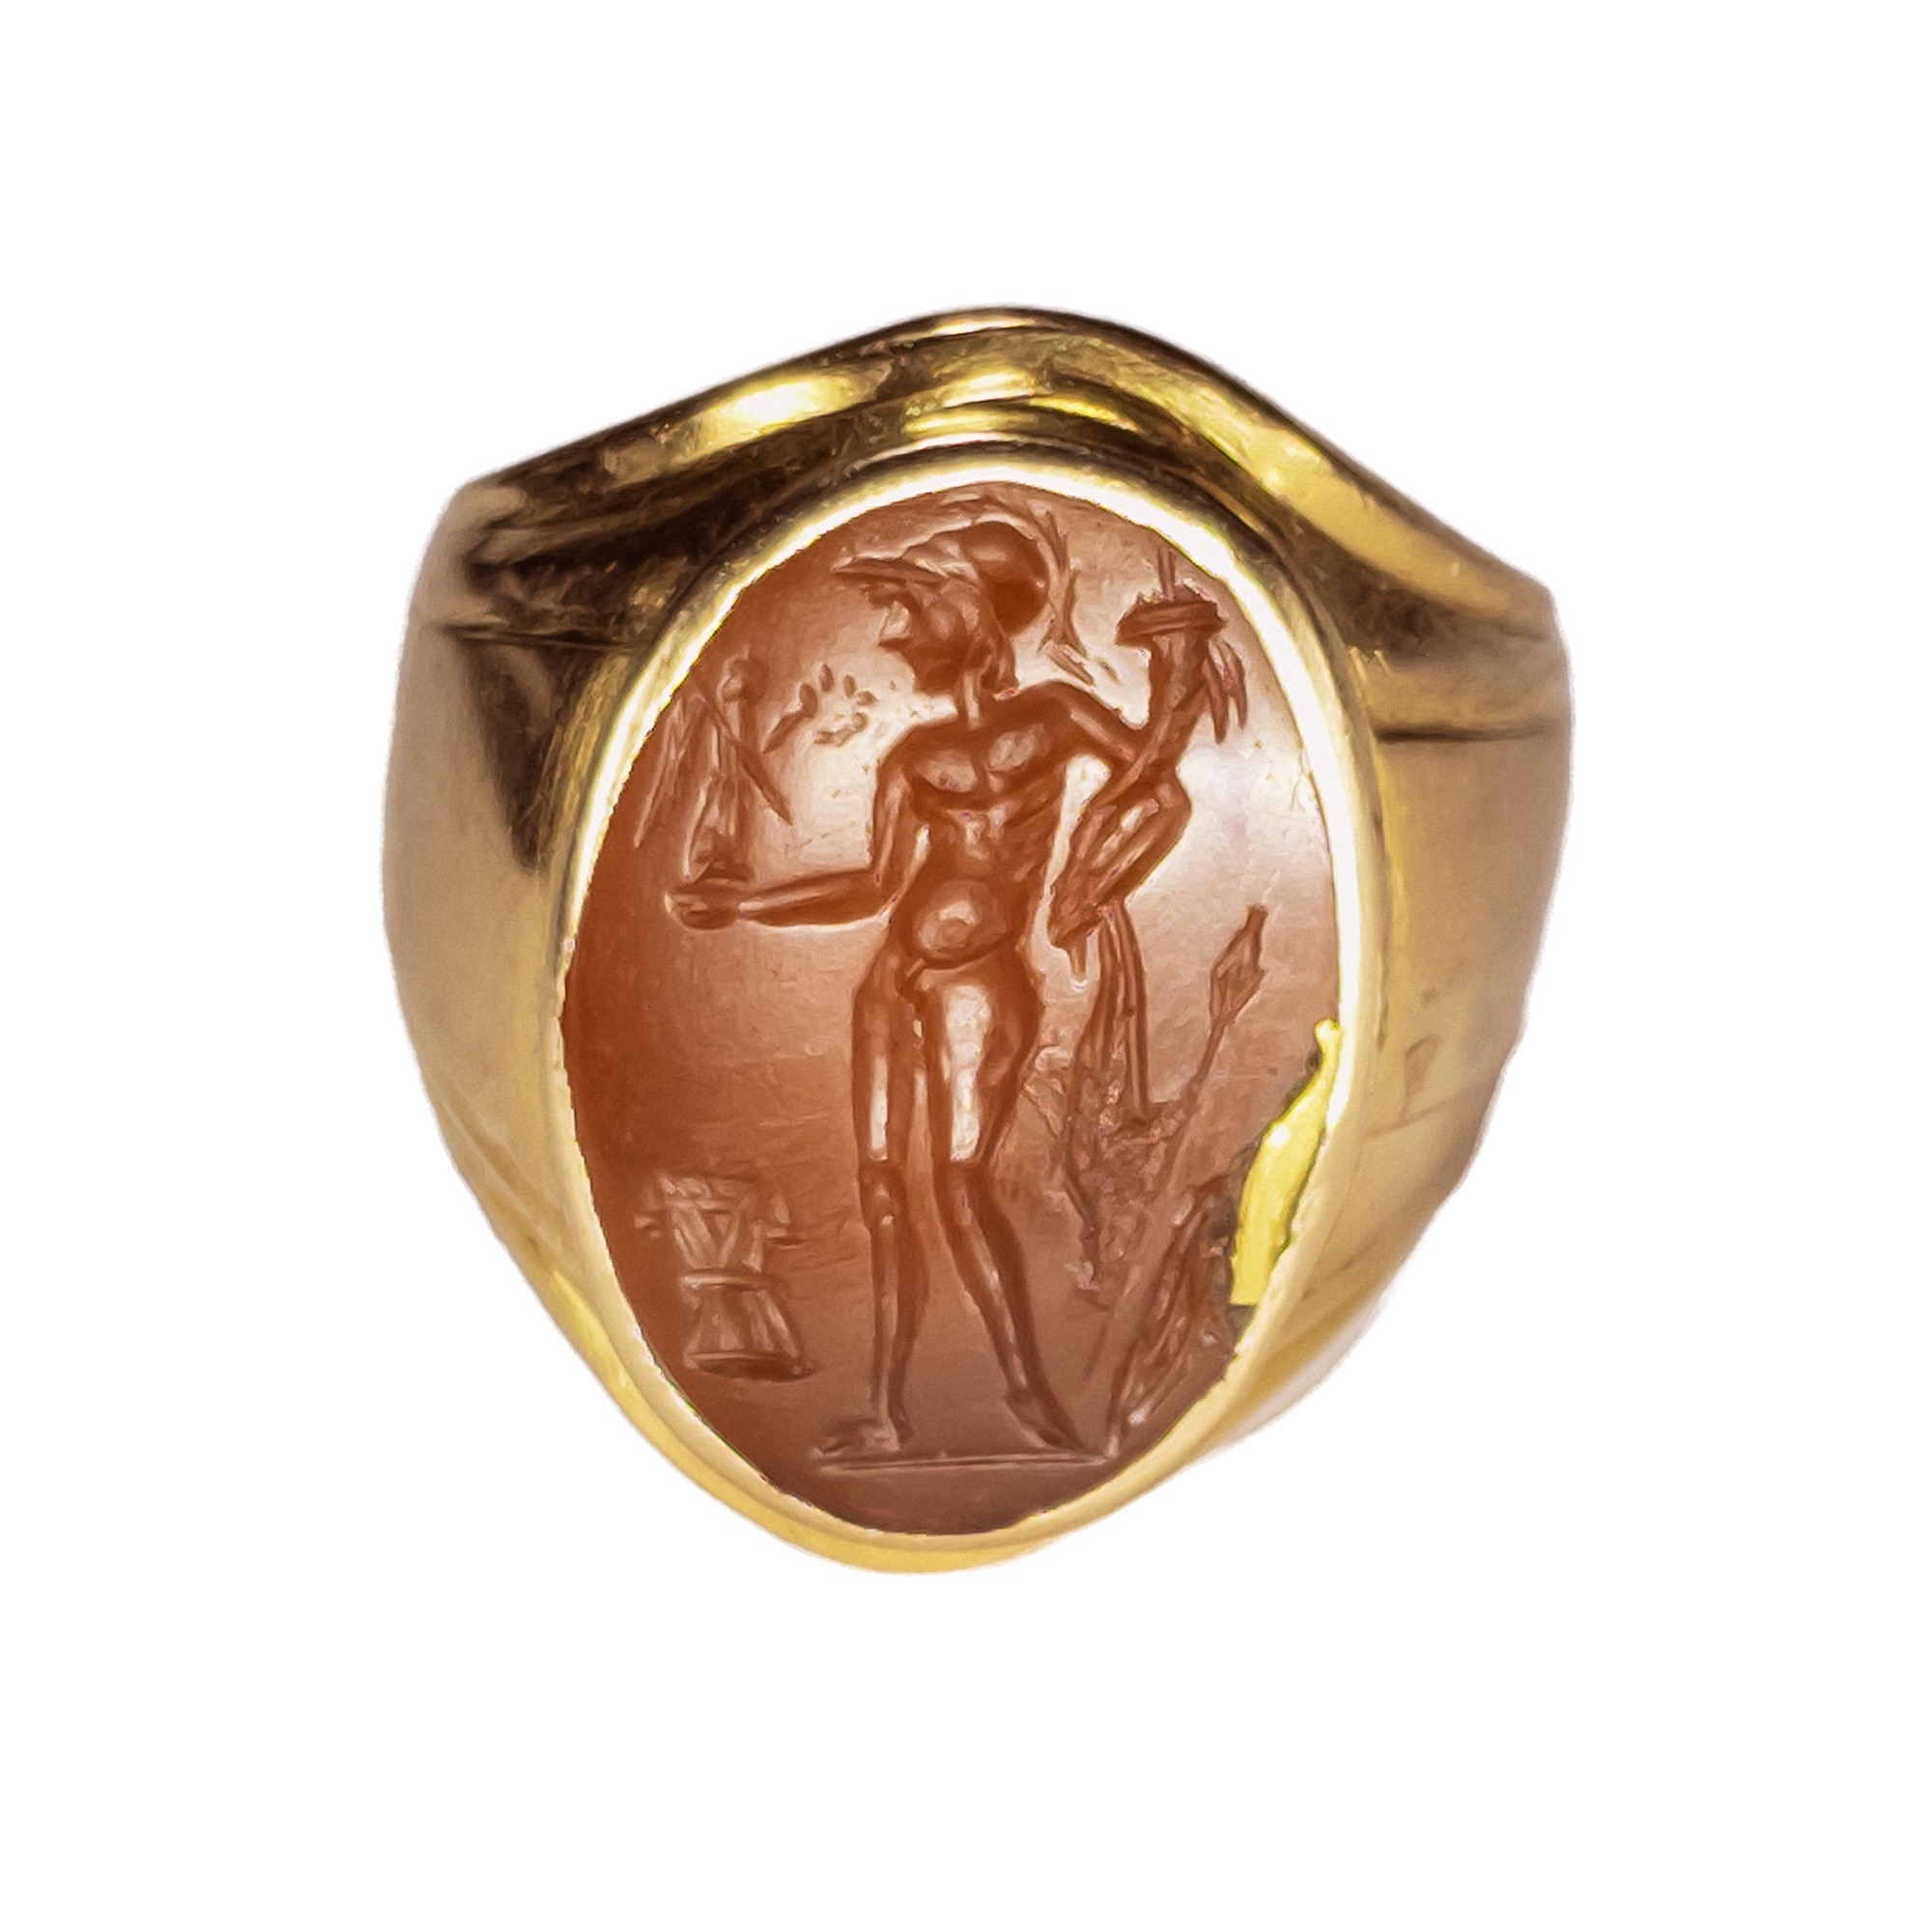 A fine Roman carnelian intaglio of Mars 2nd to 3rd century AD, set in an antique gold ring